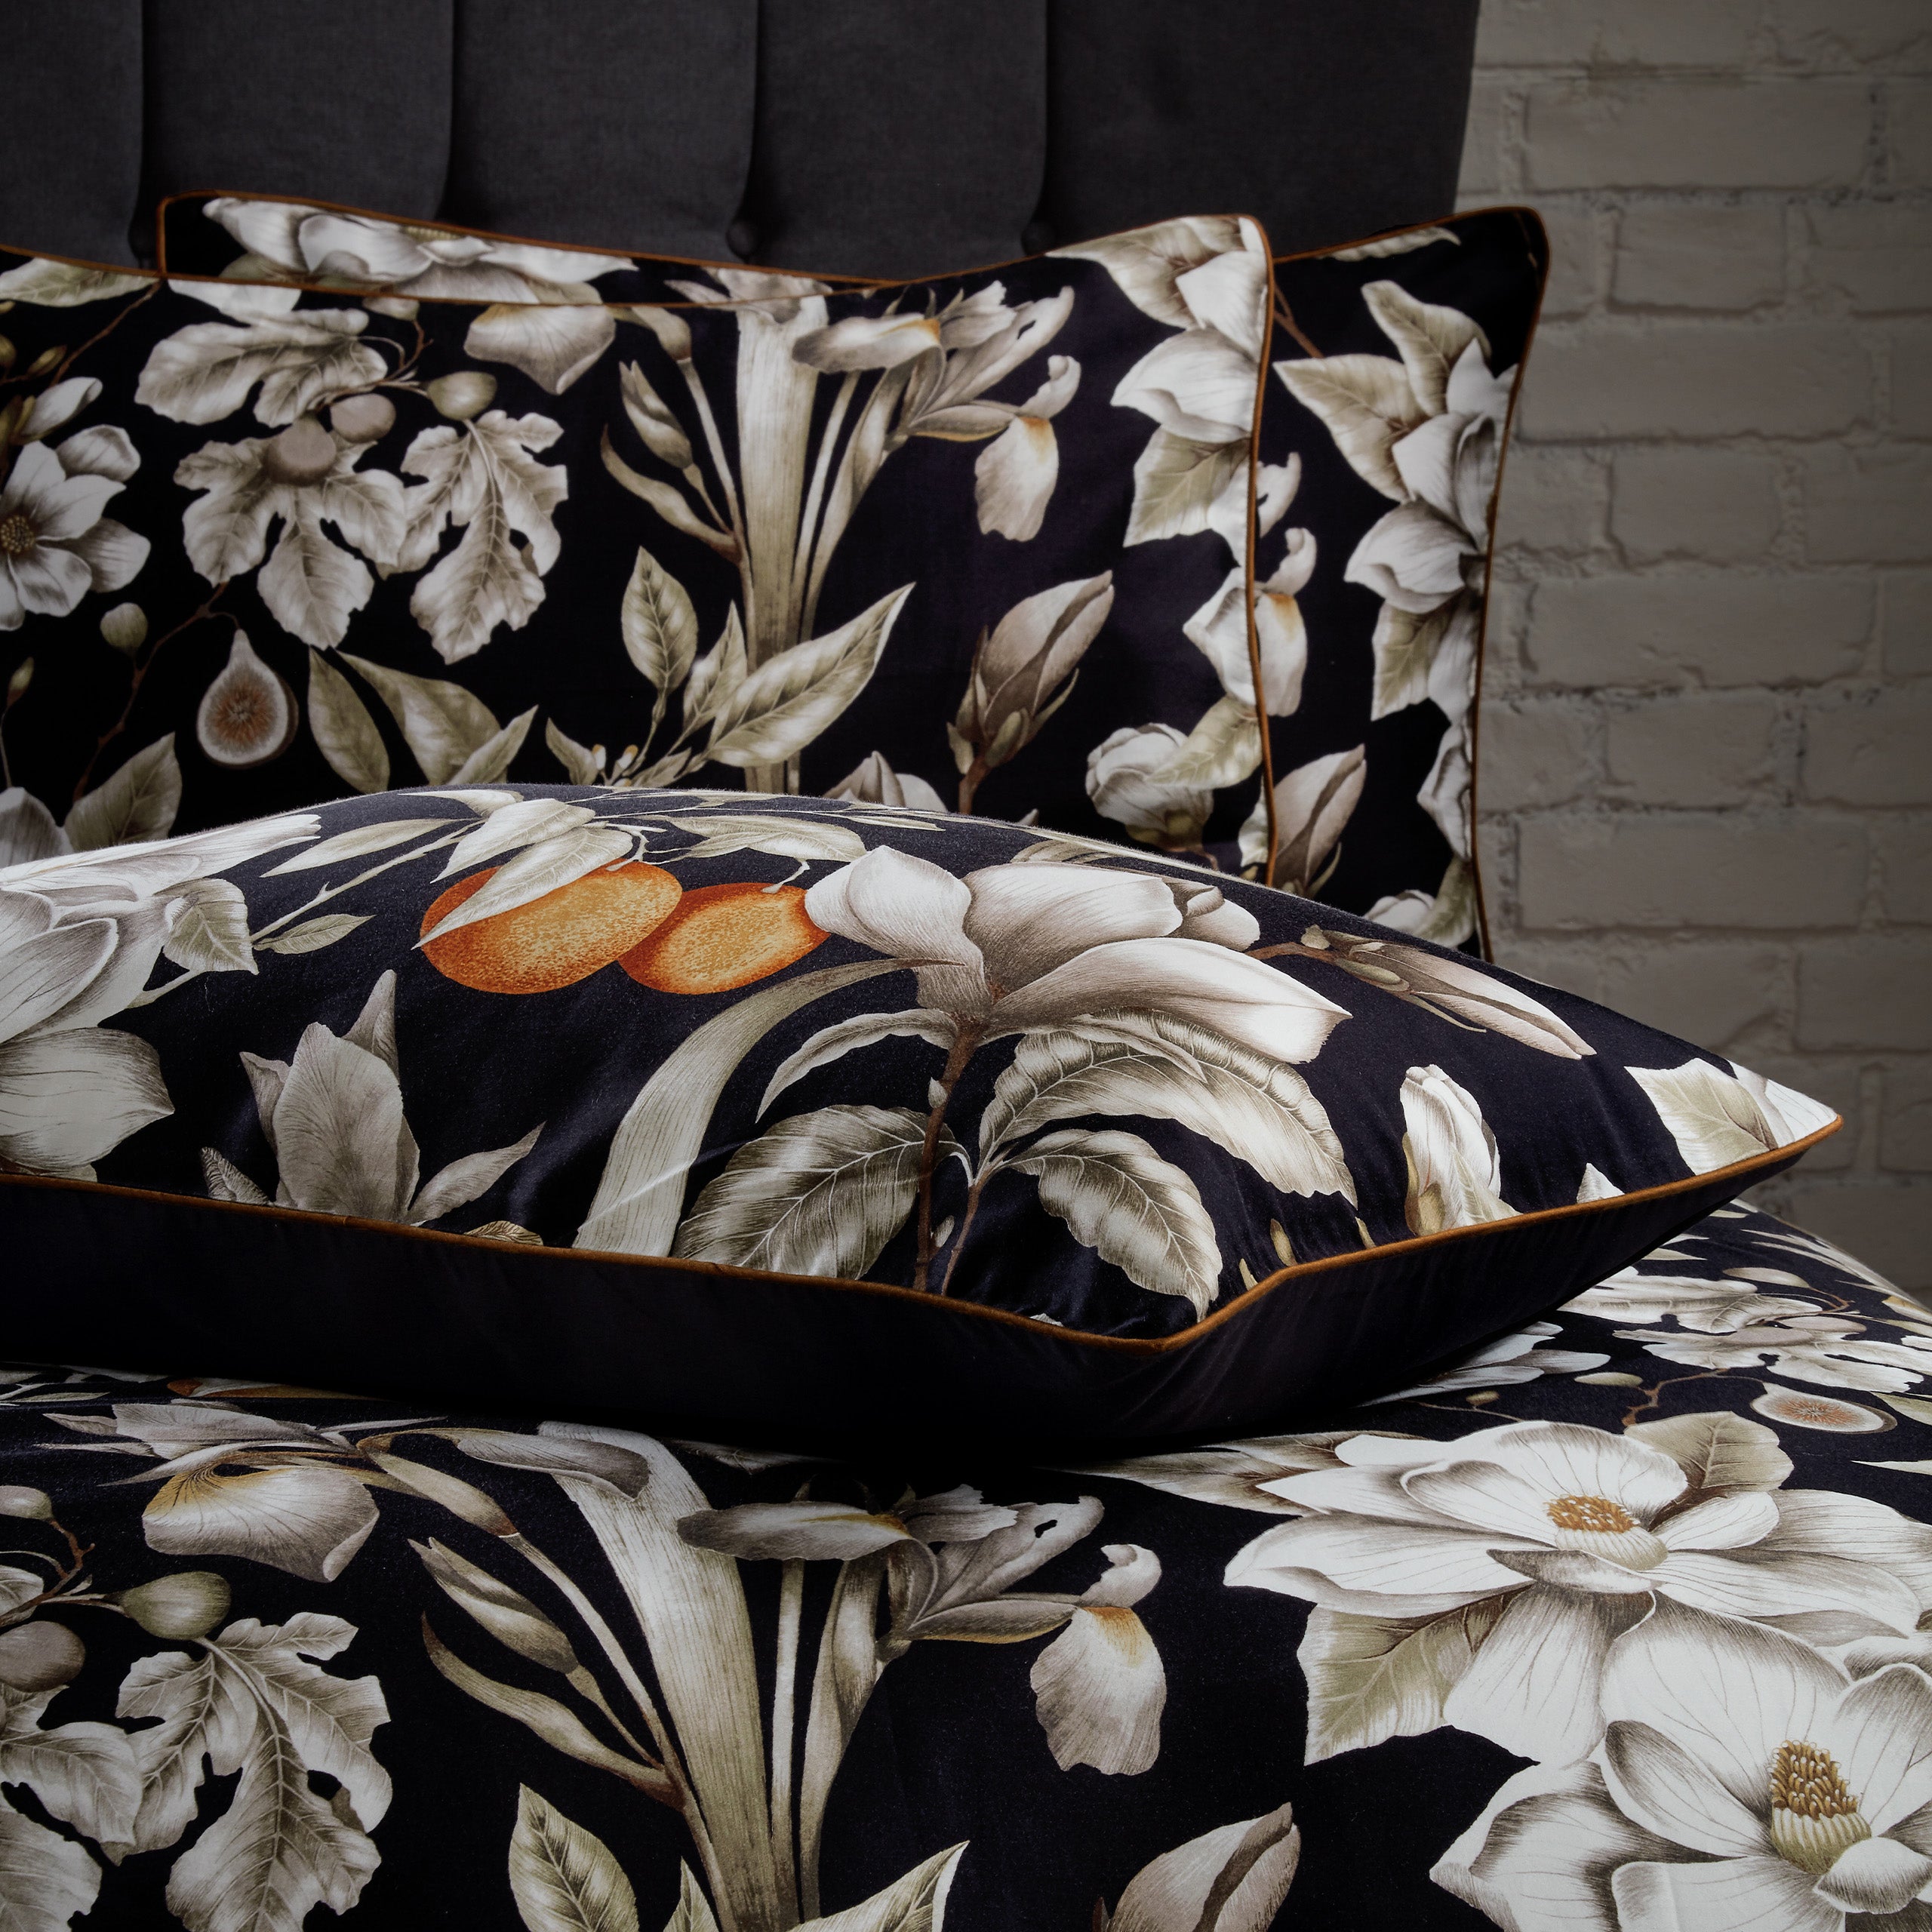 Lavish Floral Printed Piped Cotton Sateen King Duvet Cover Set